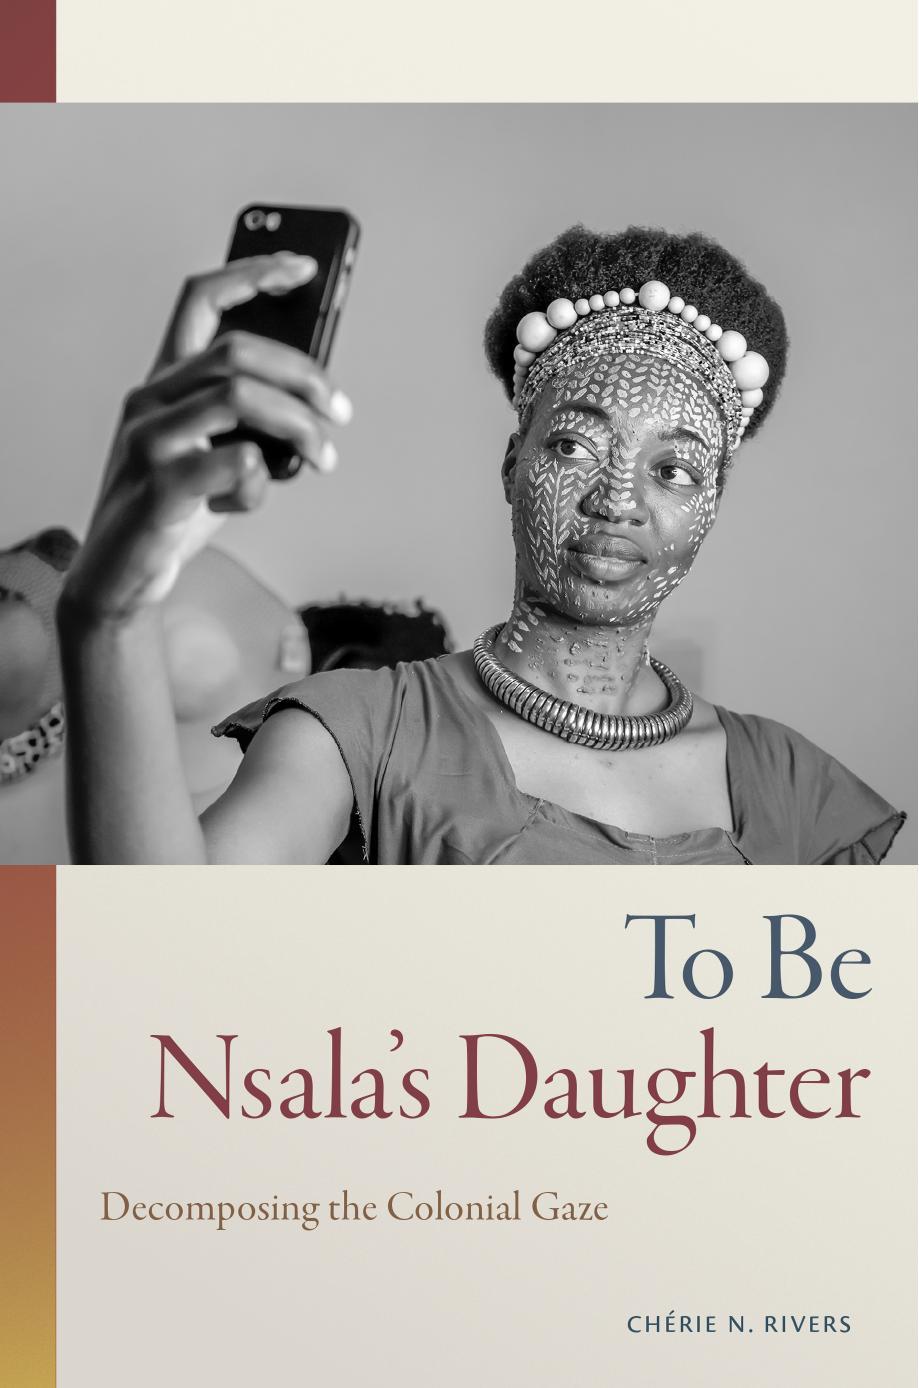 To Be Nsala's Daughter: Decomposing the Colonial Gaze by Chérie N. Rivers